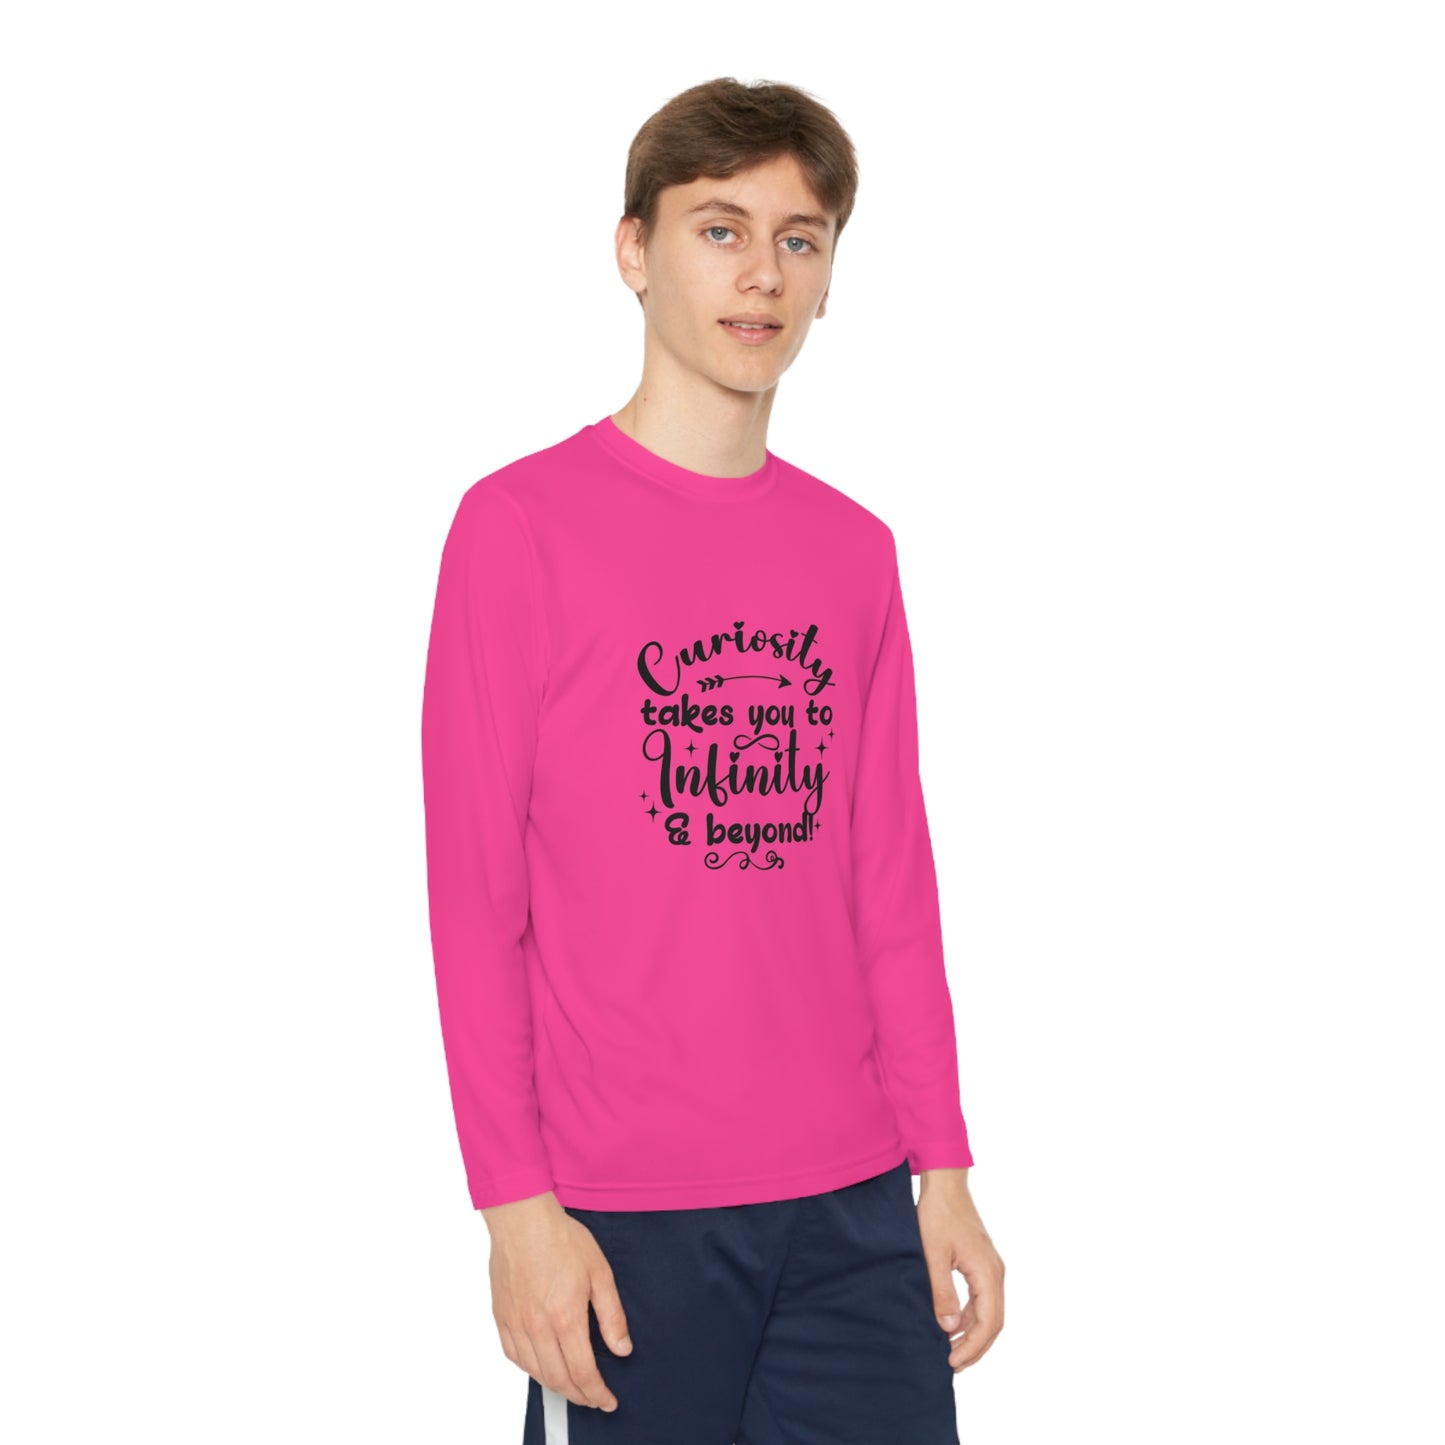 Youth Long Sleeve Competitor Tee - Infinity and Beyond